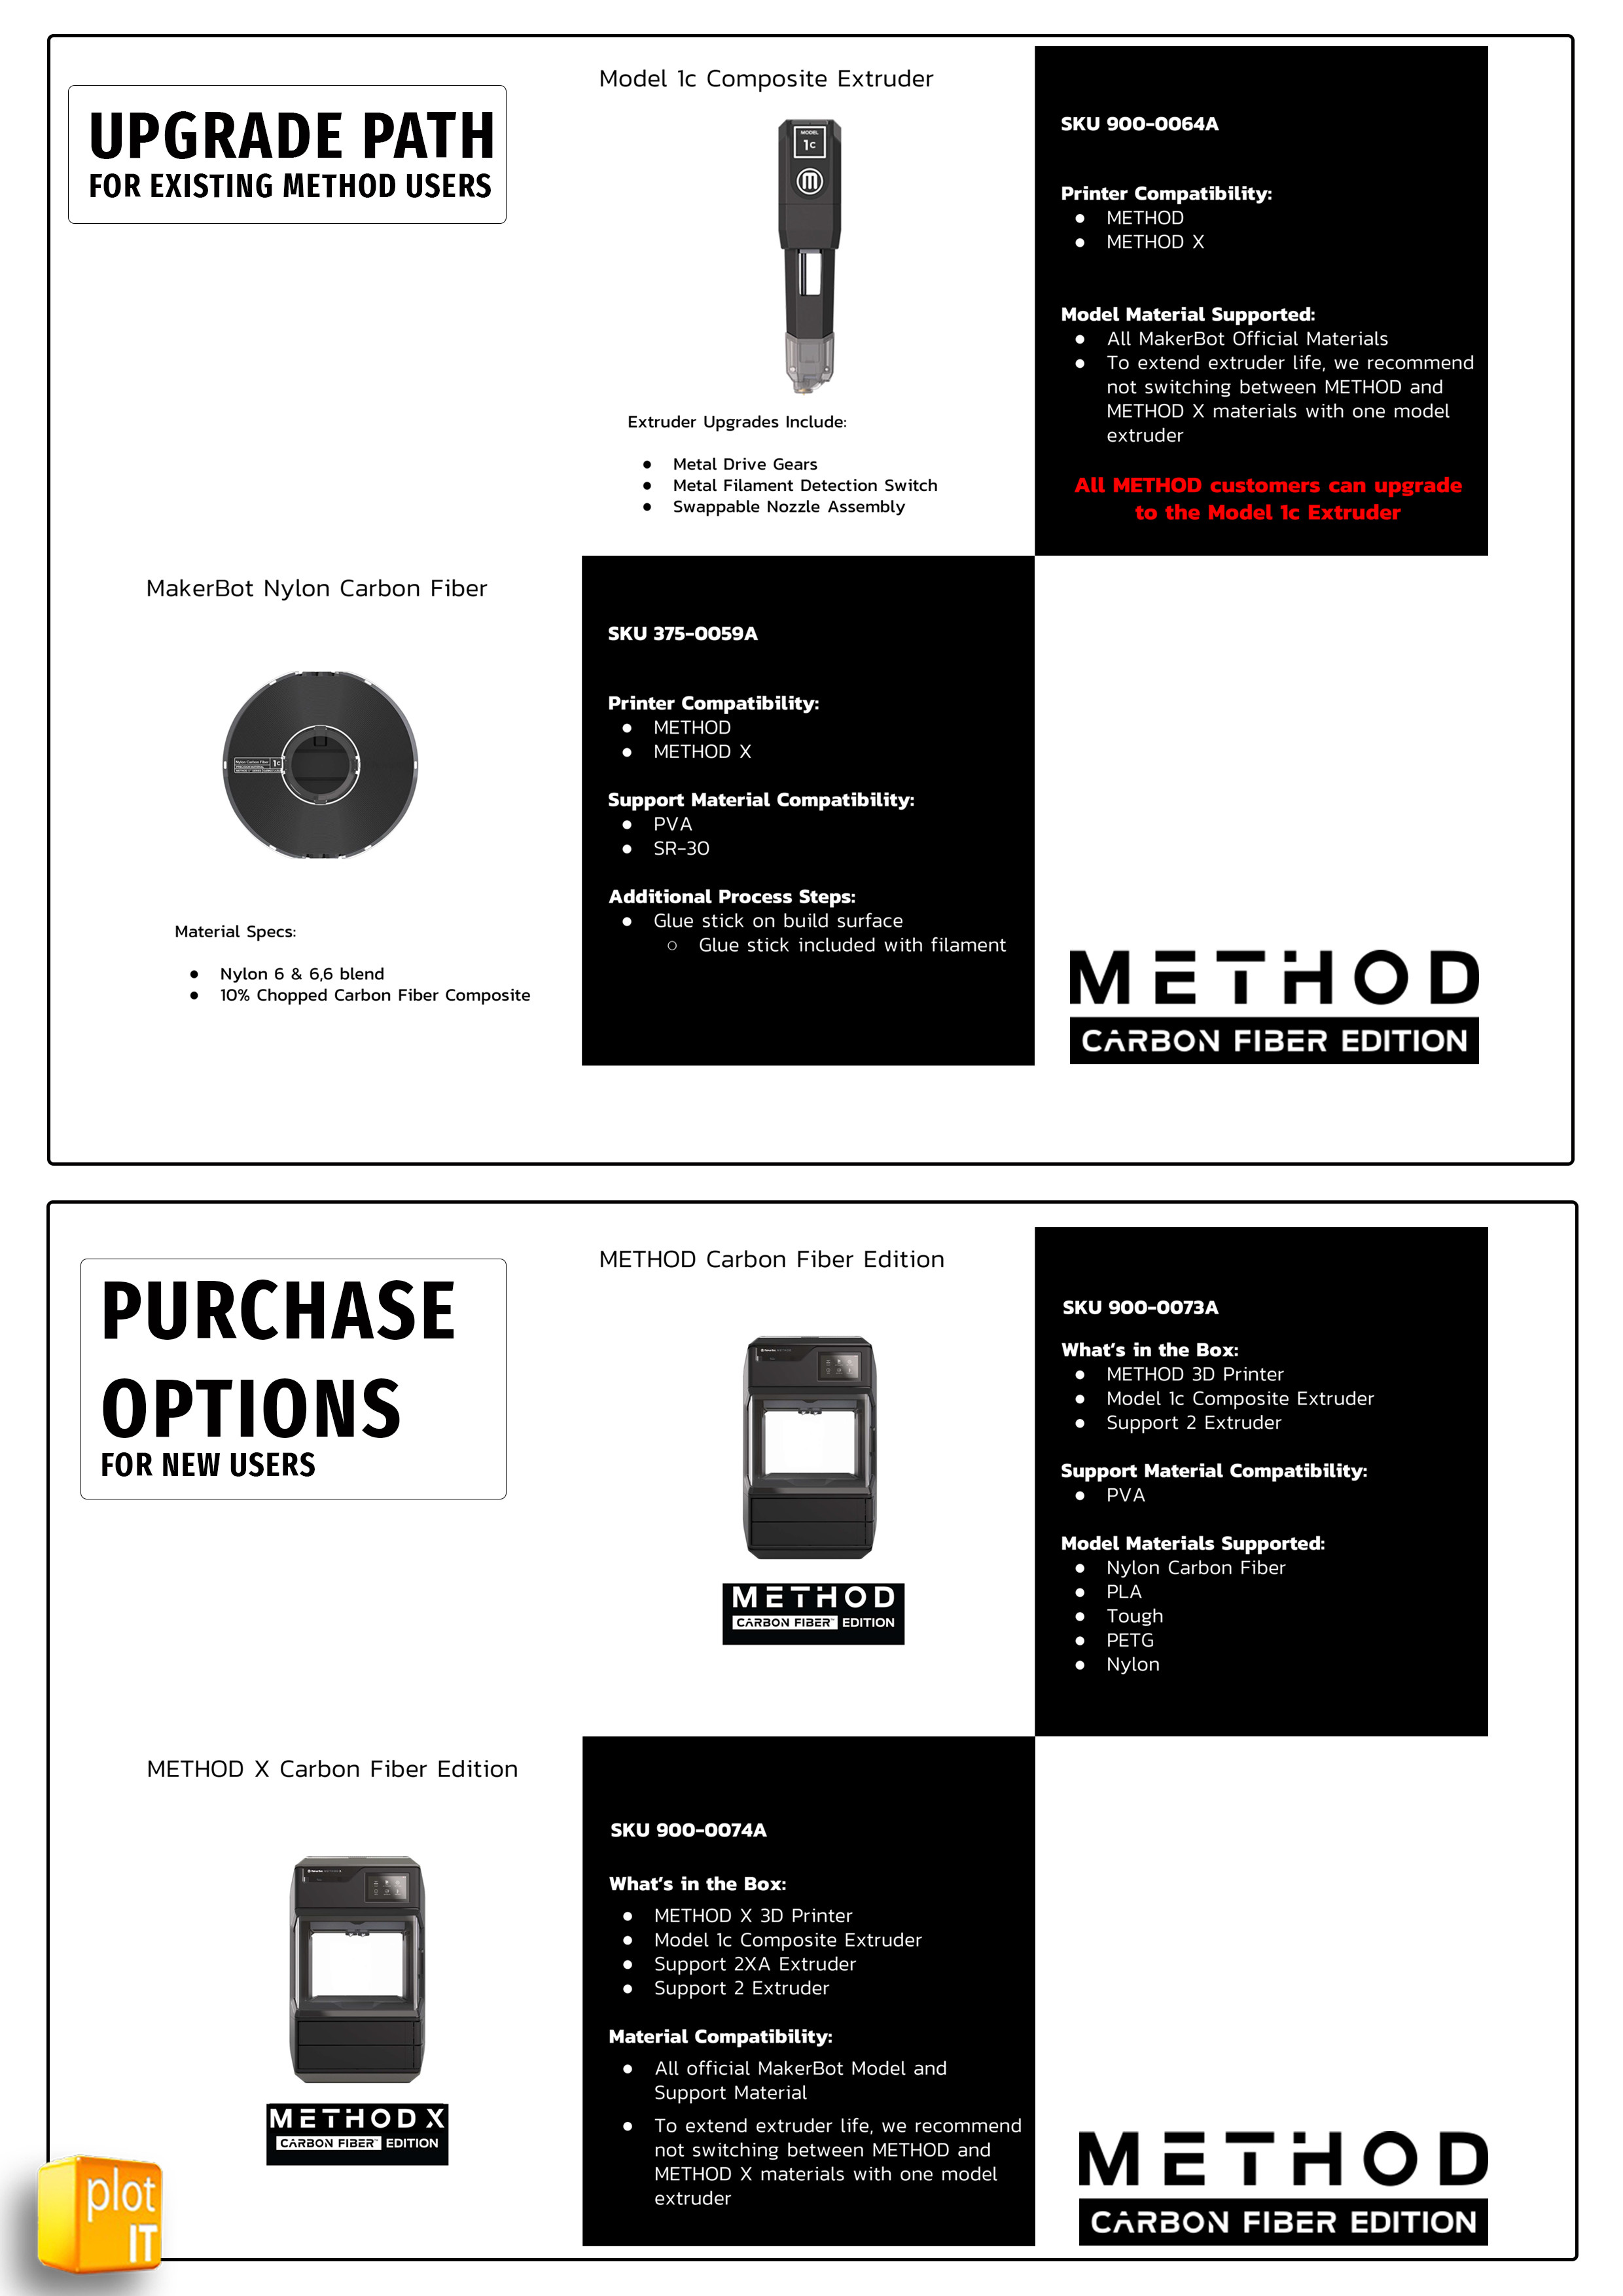 MAKERBOT_CF EDITION_PURCHASE OPTIONS & UPGRADE PATH